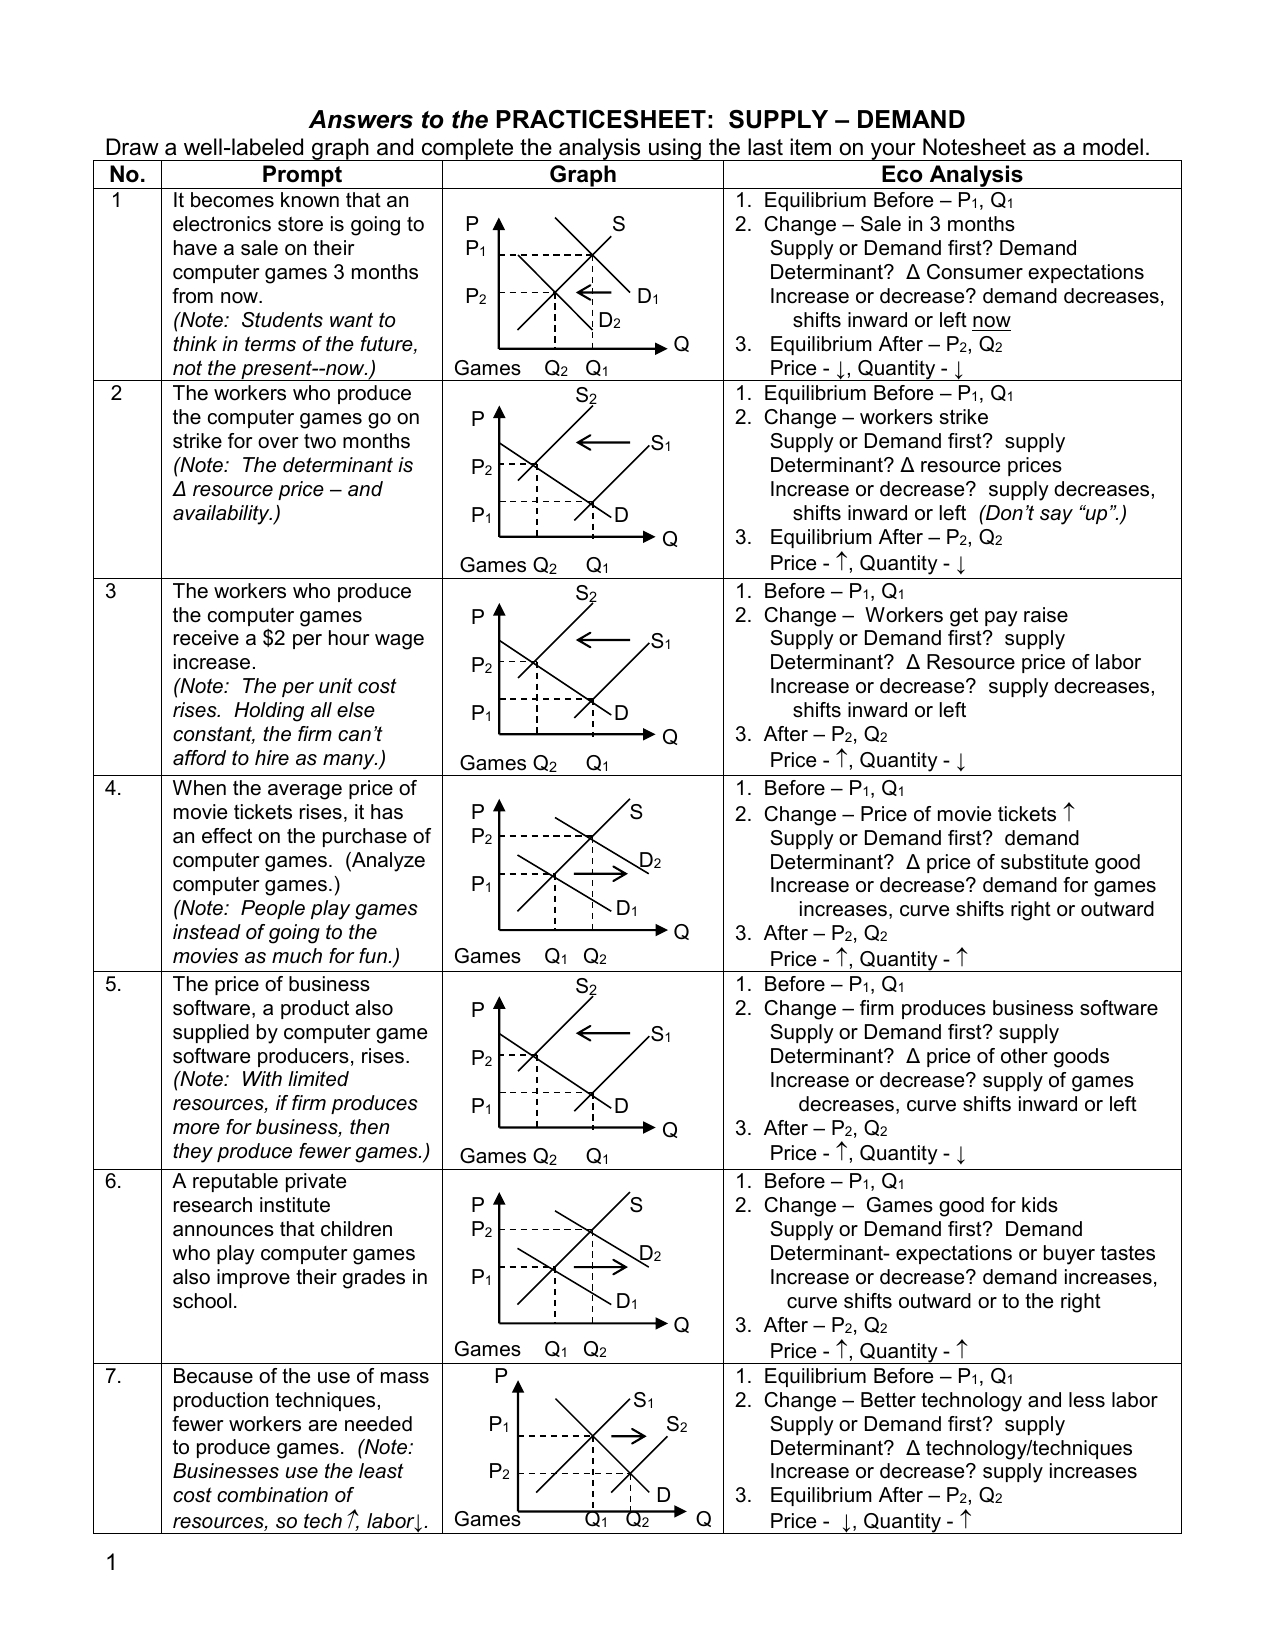  Supply And Demand Practice Worksheet Free Download Goodimg co